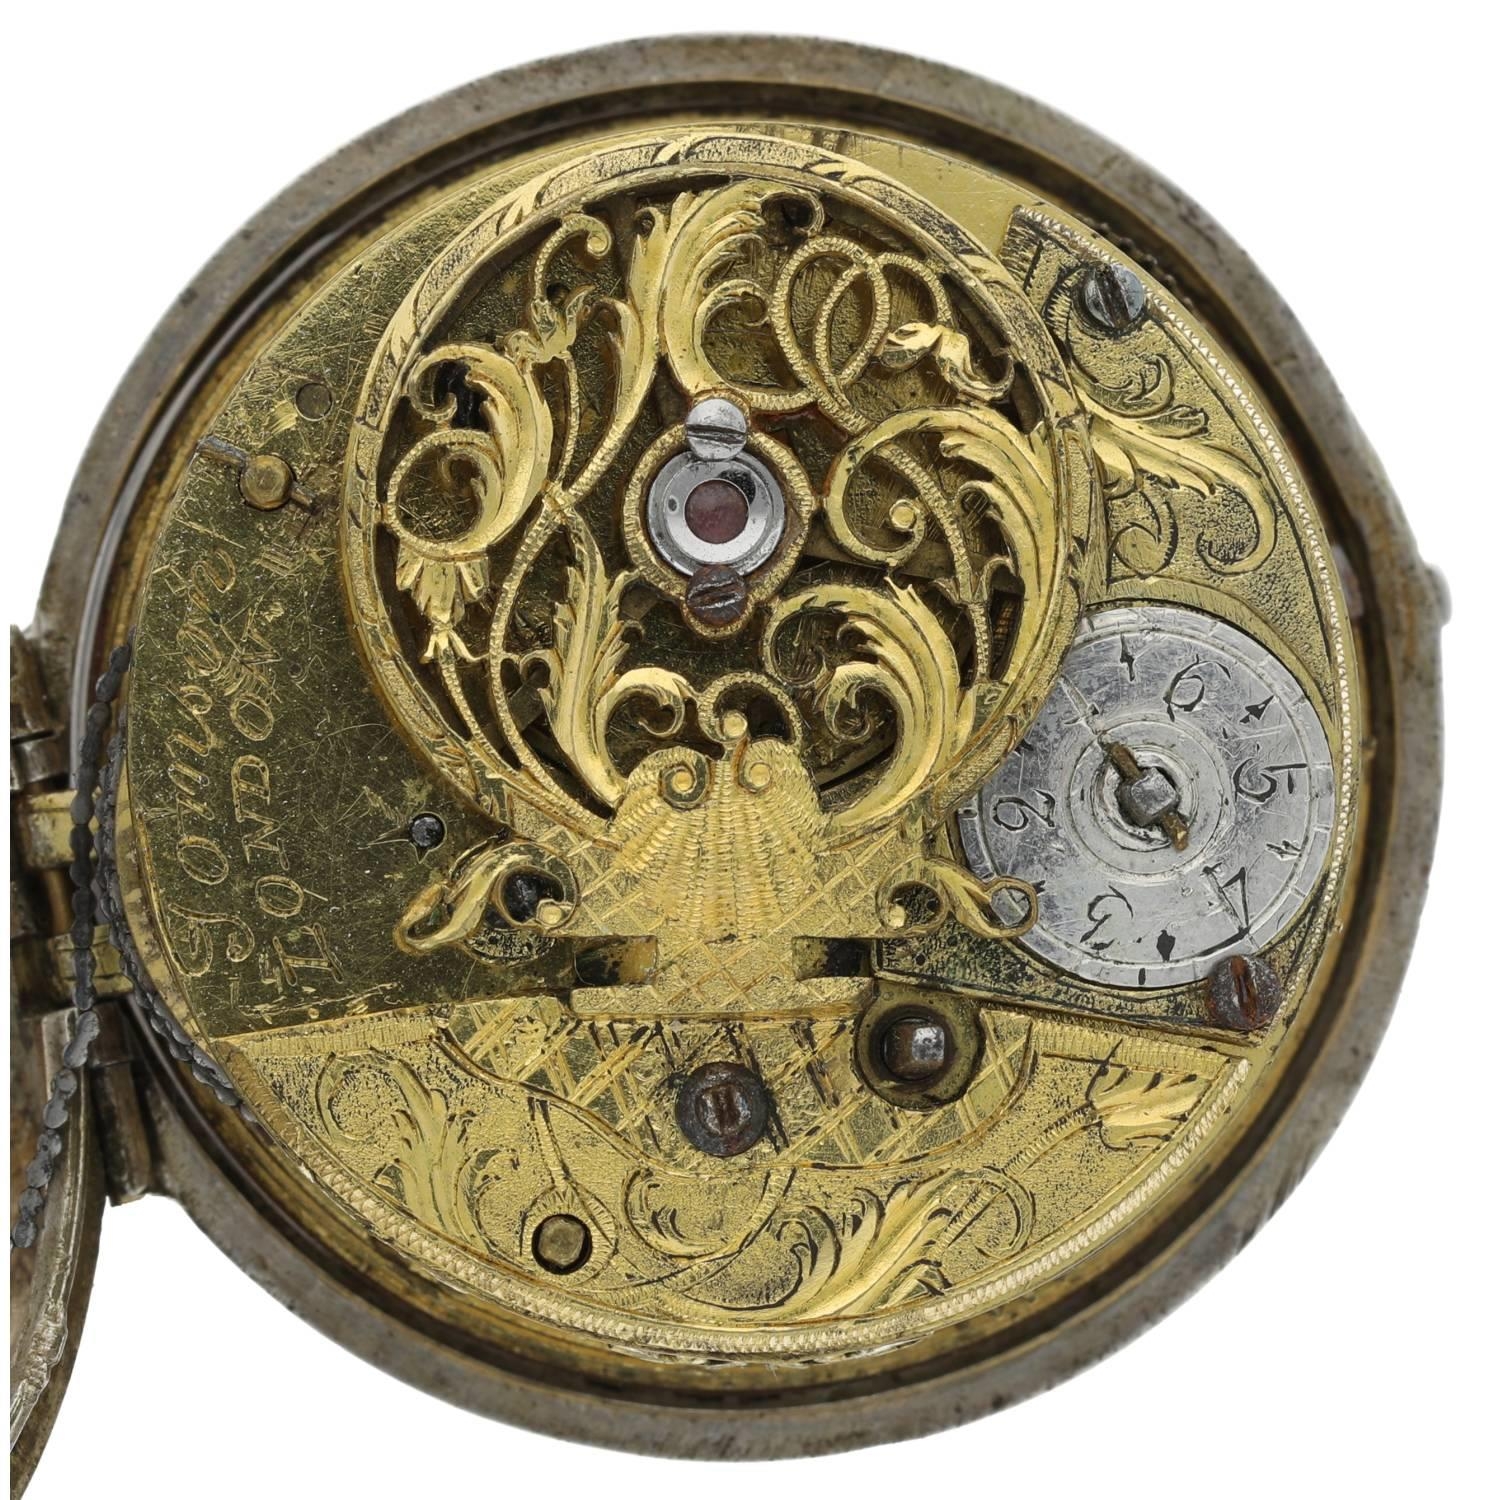 Tomson, London - English 18th century silver pair cased verge pocket watch, signed fusee movement, - Image 5 of 7